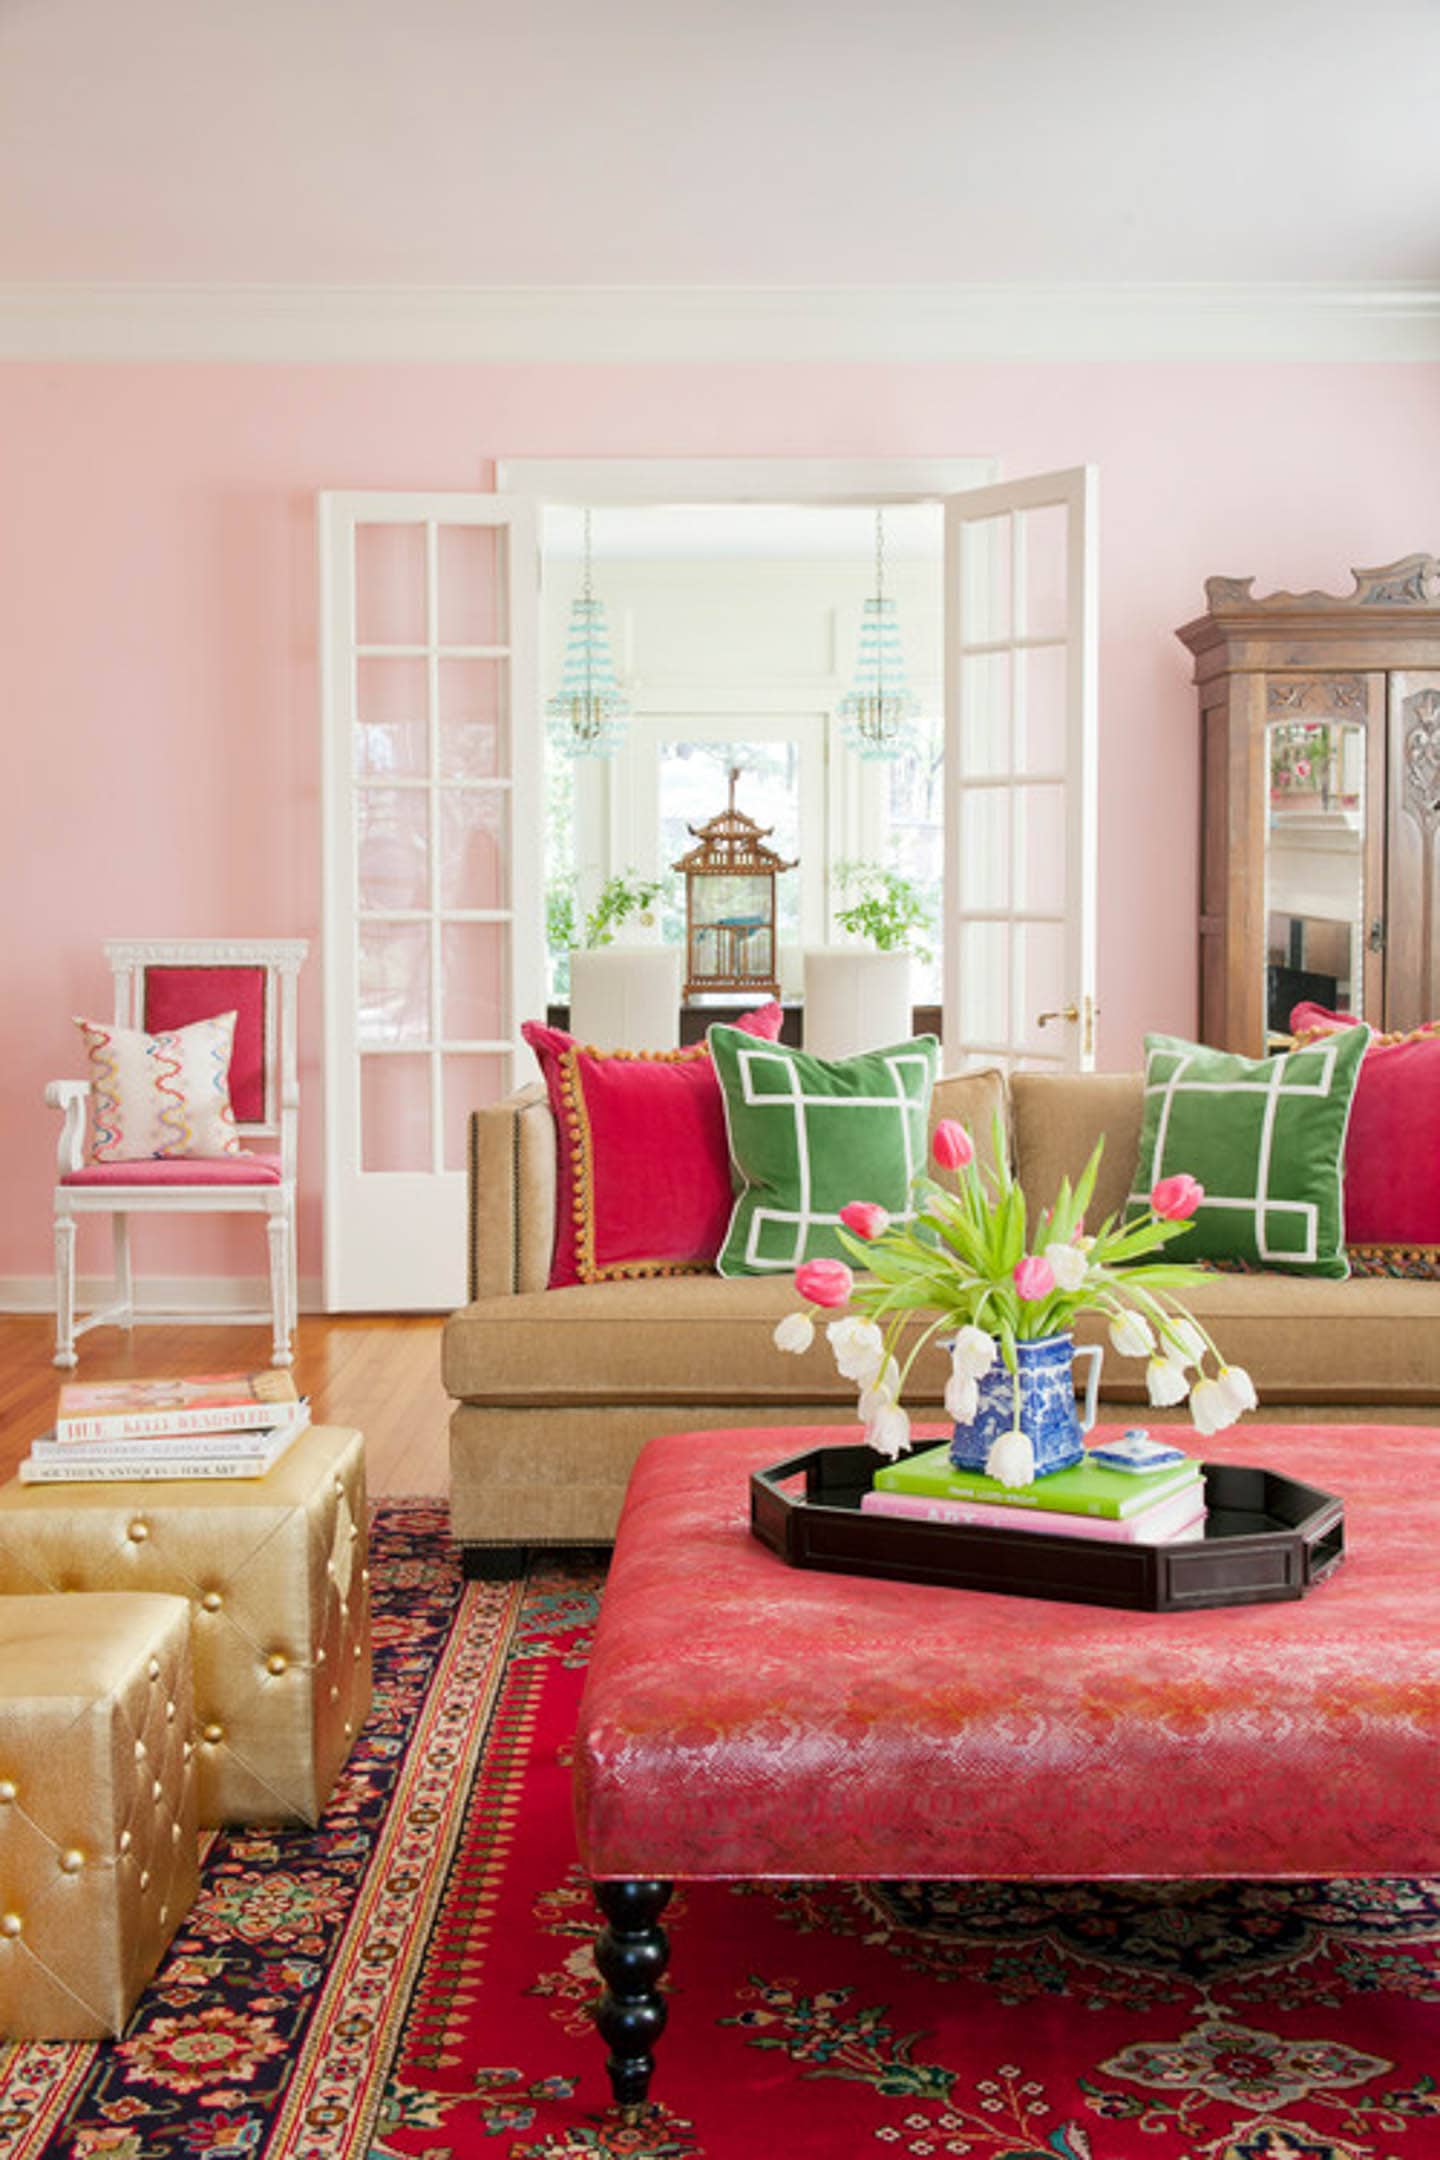 Living room with pink walls, tan sofa, red and green throw pillows and a red ottoman